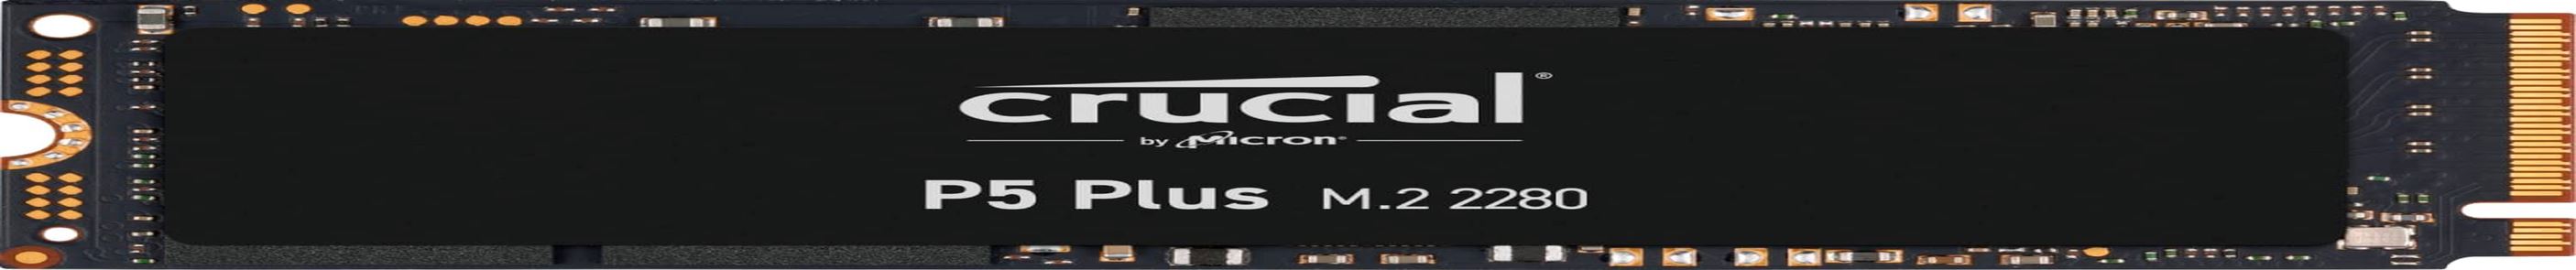 Crucial P5 plus CT1000P5PSSD8 1TB (Pcie 4.0, 3D NAND, Nvme, M.2 Gaming SSD) up to 6600Mb/S